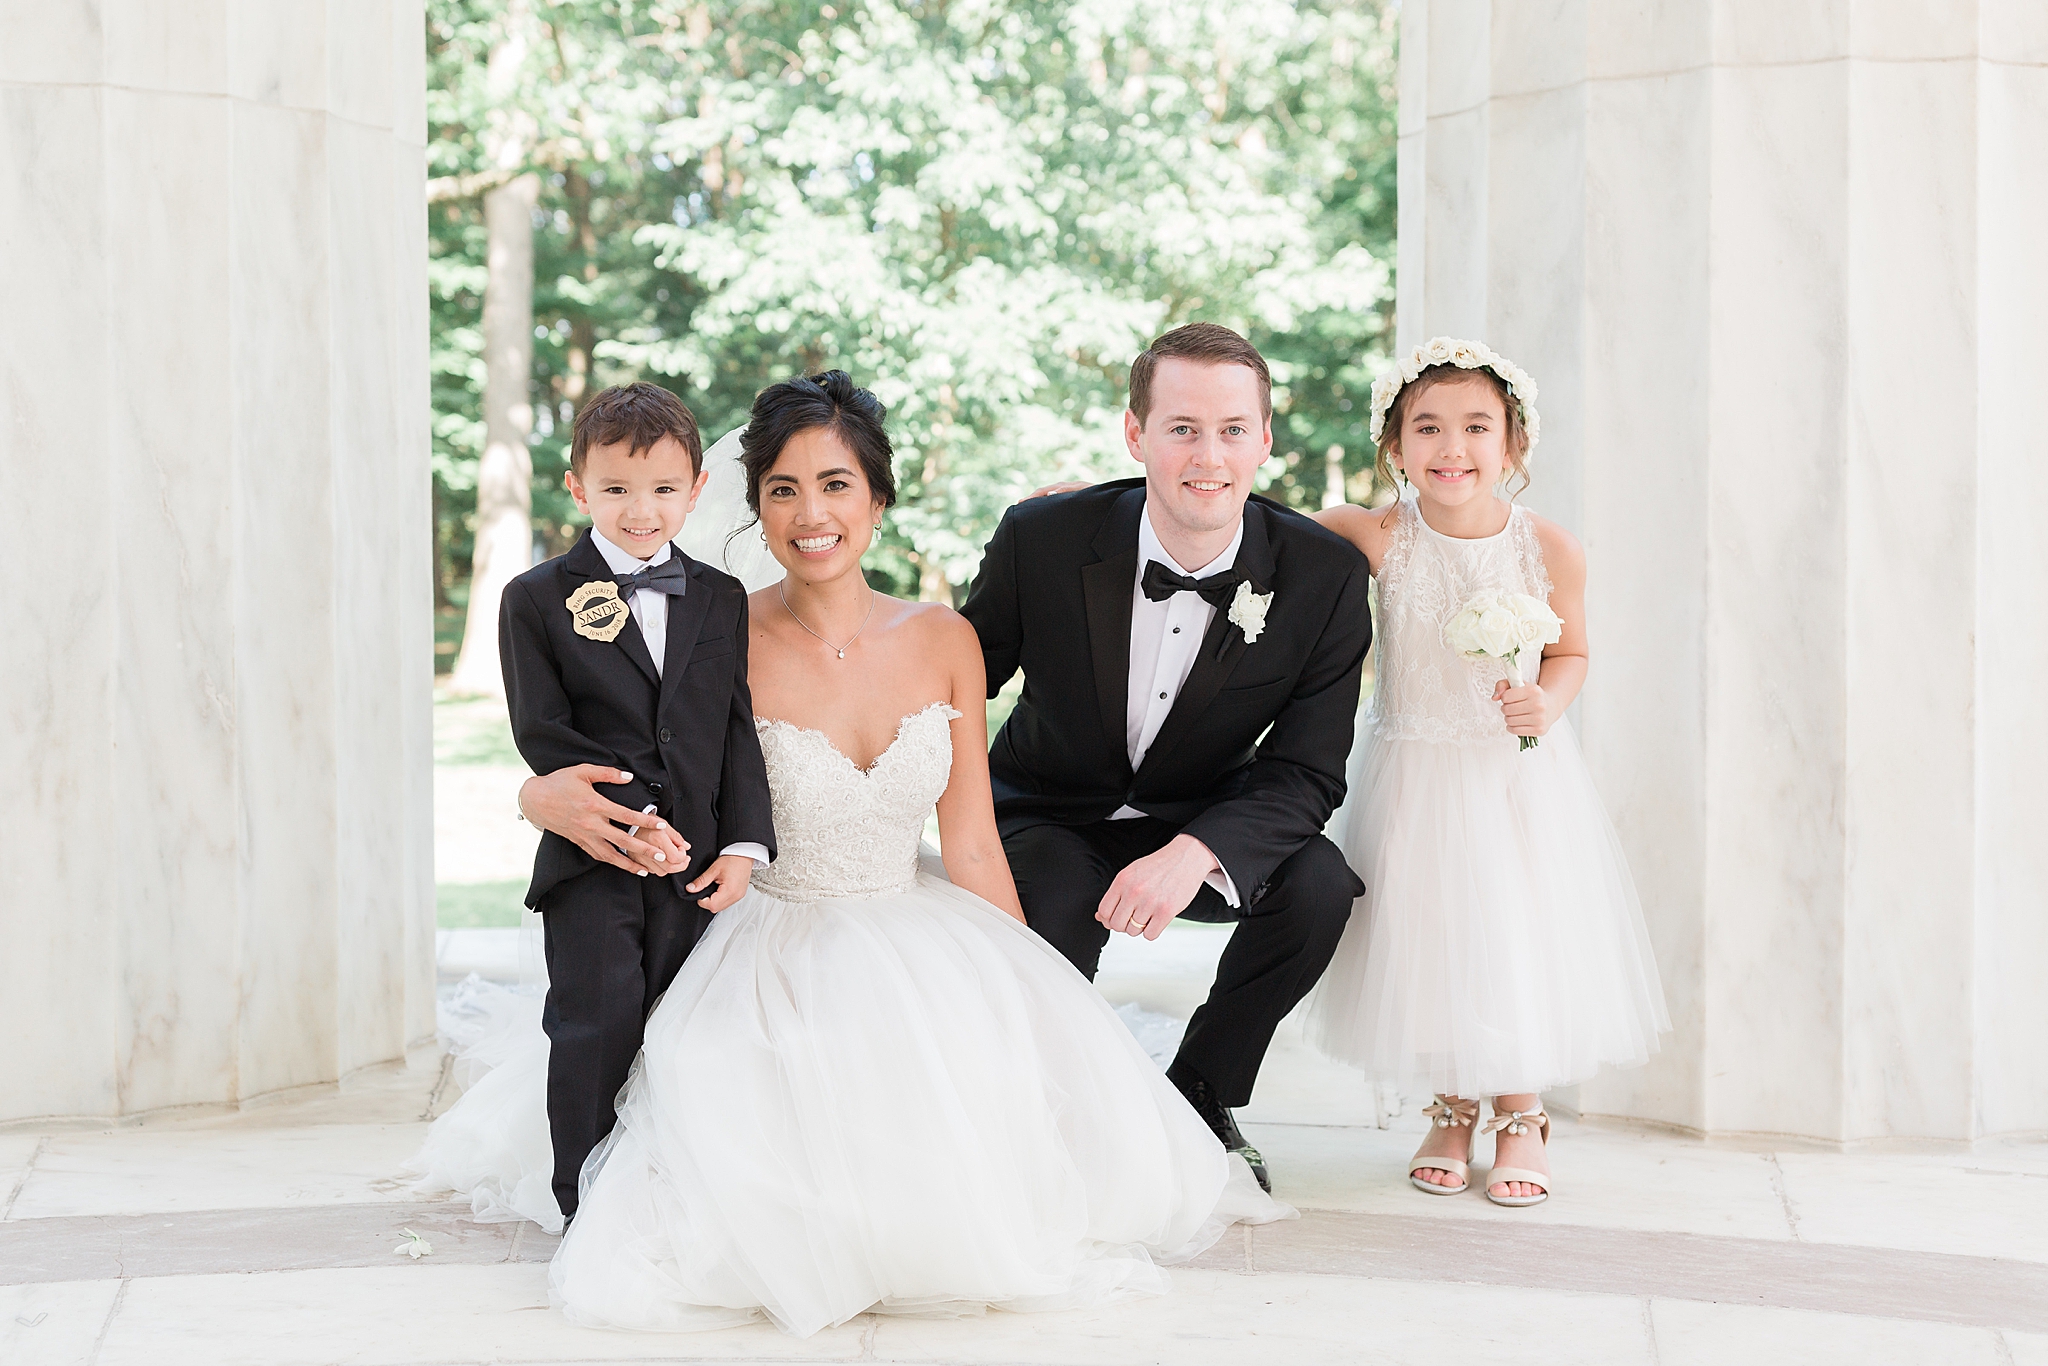 This Washington, DC wedding photographer discusses the pros and cons to having children in attendance at your wedding celebrating.